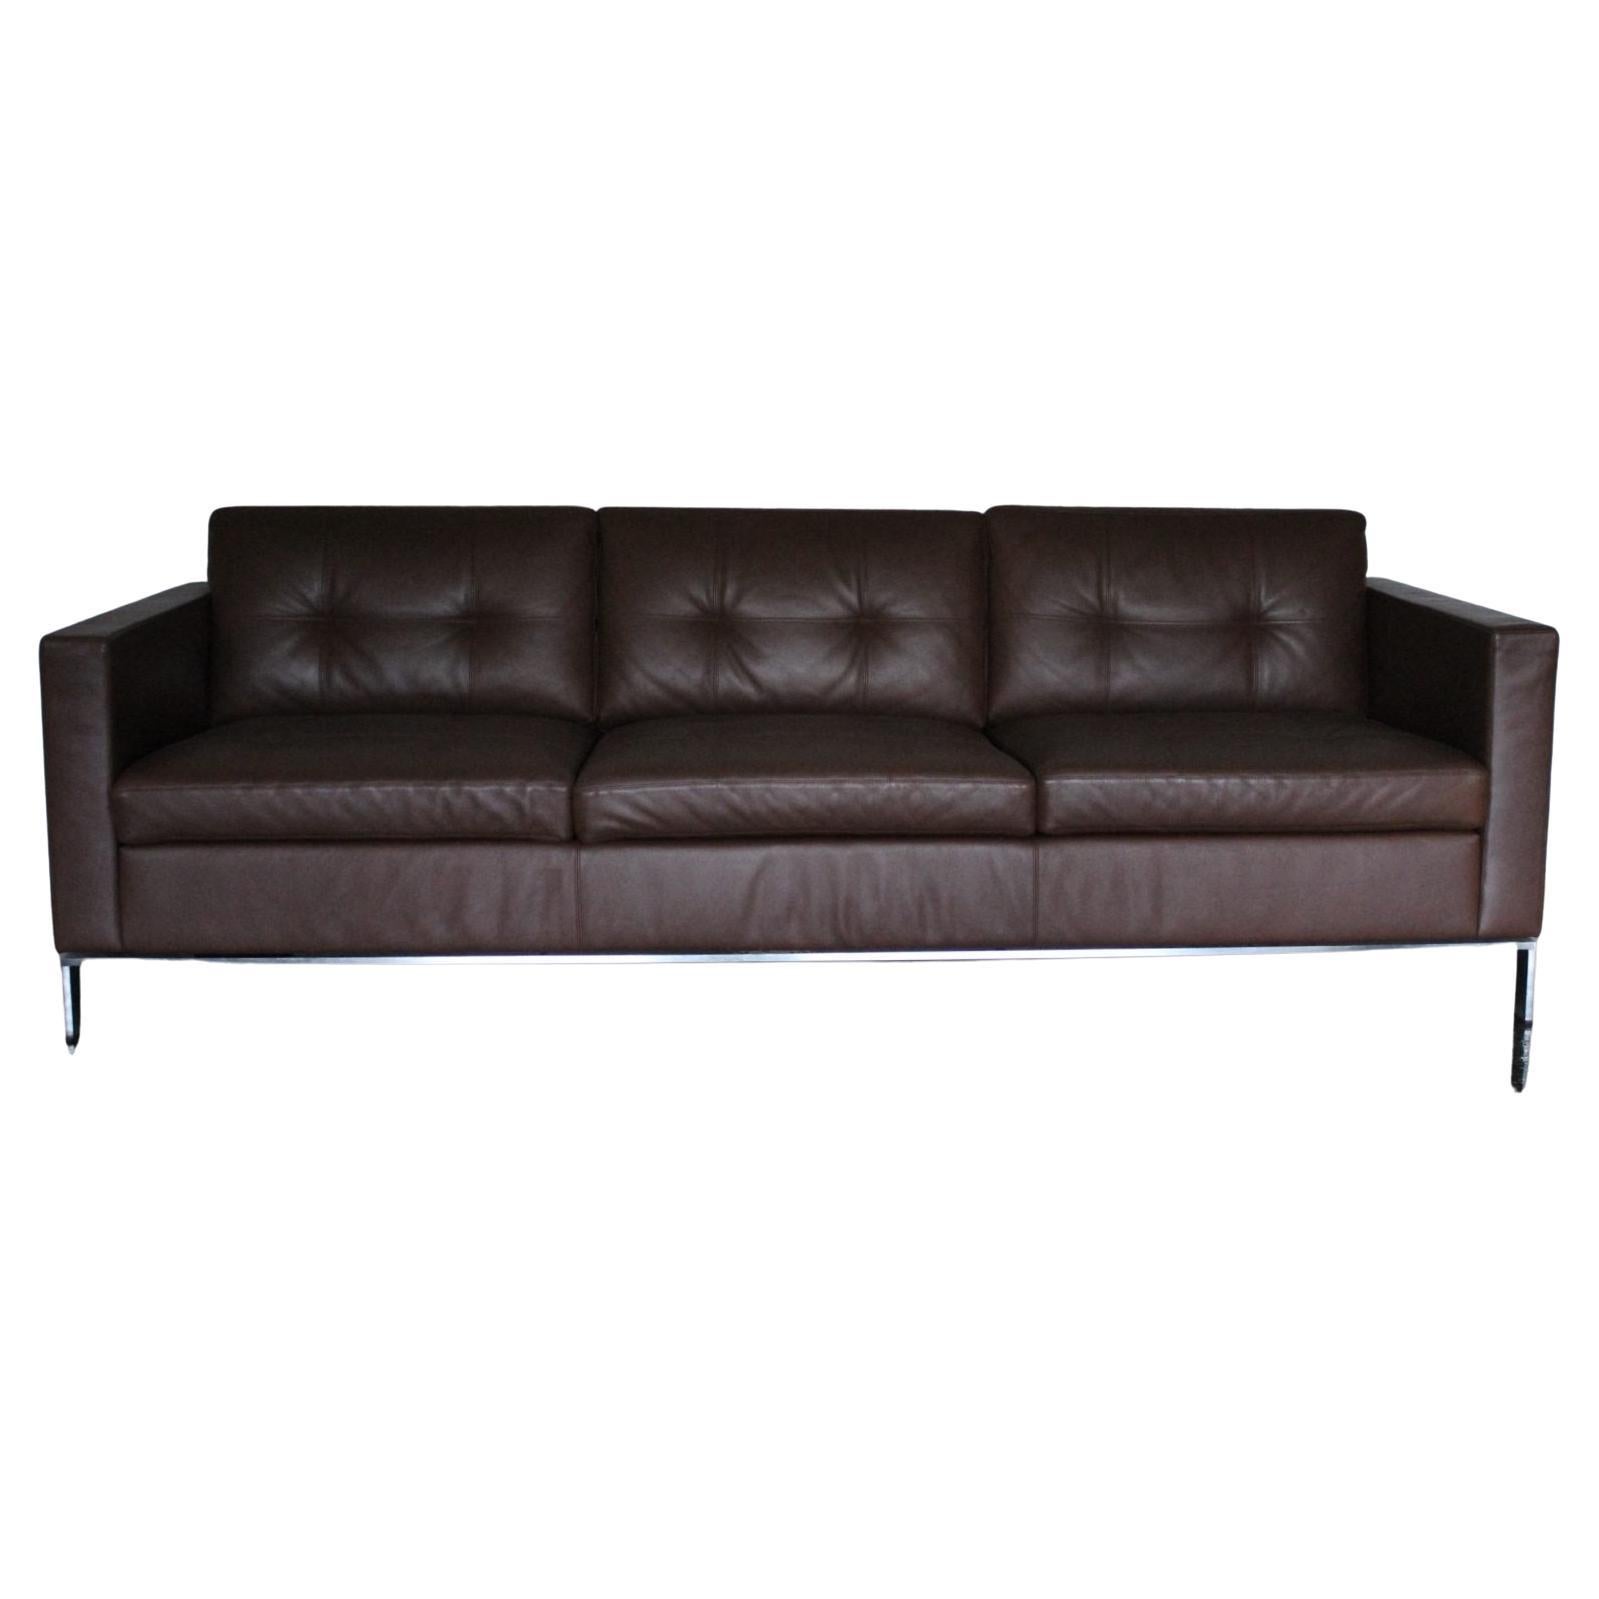 Walter Knoll “Foster 502.30” 3-Seat Sofa – In Dark Brown Leather